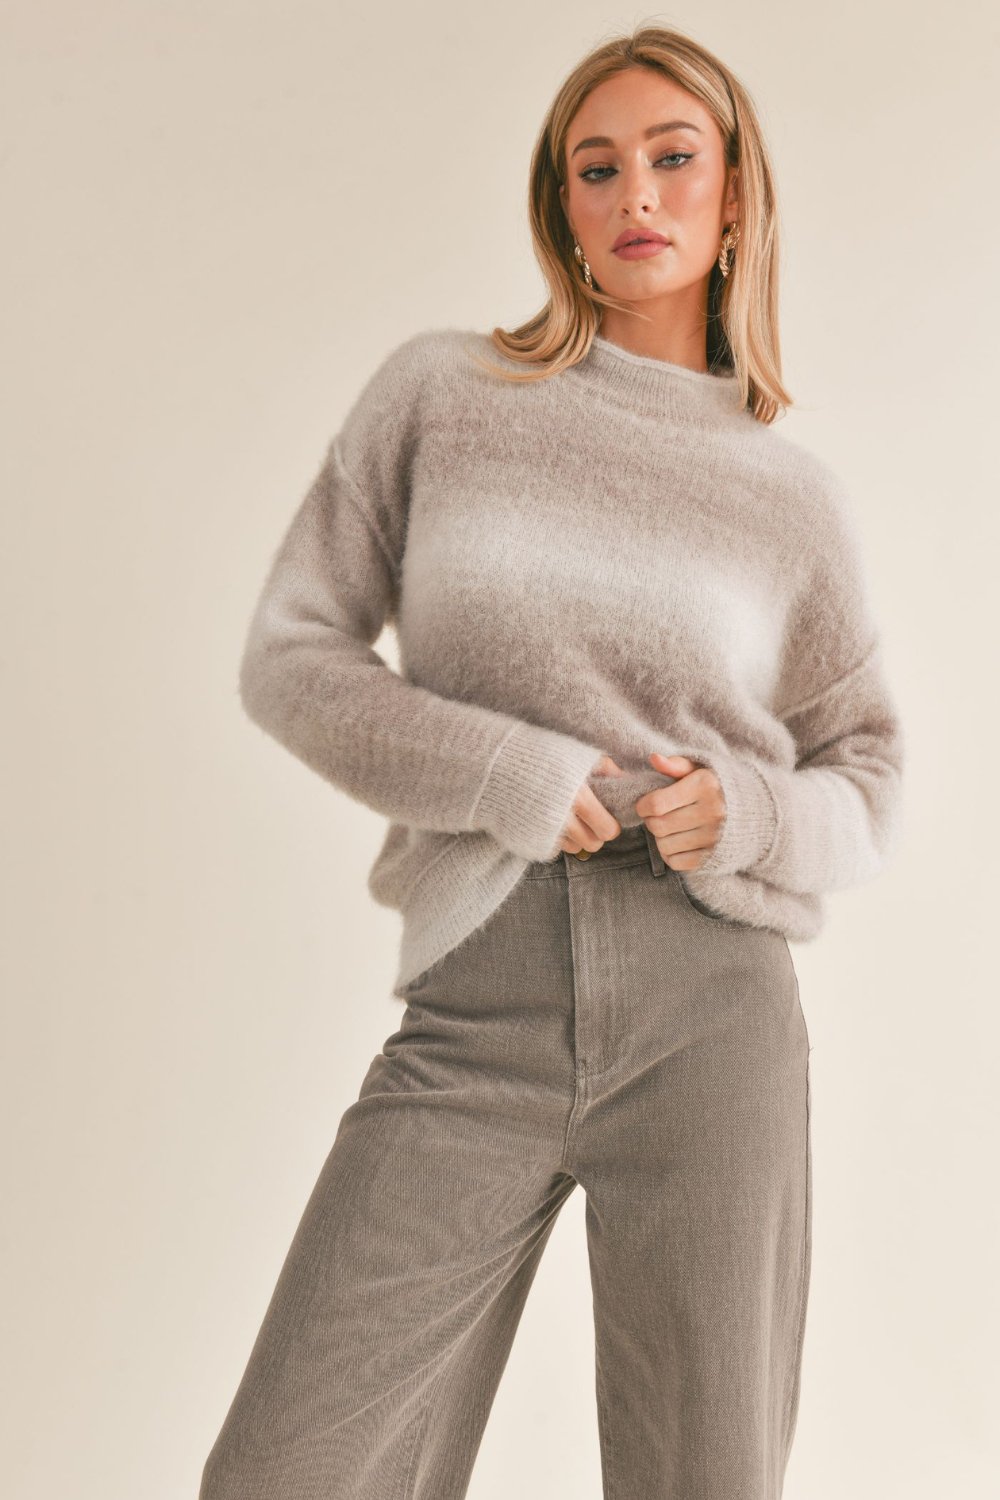 Women's Wednesday Layered Twofer Sweater Top